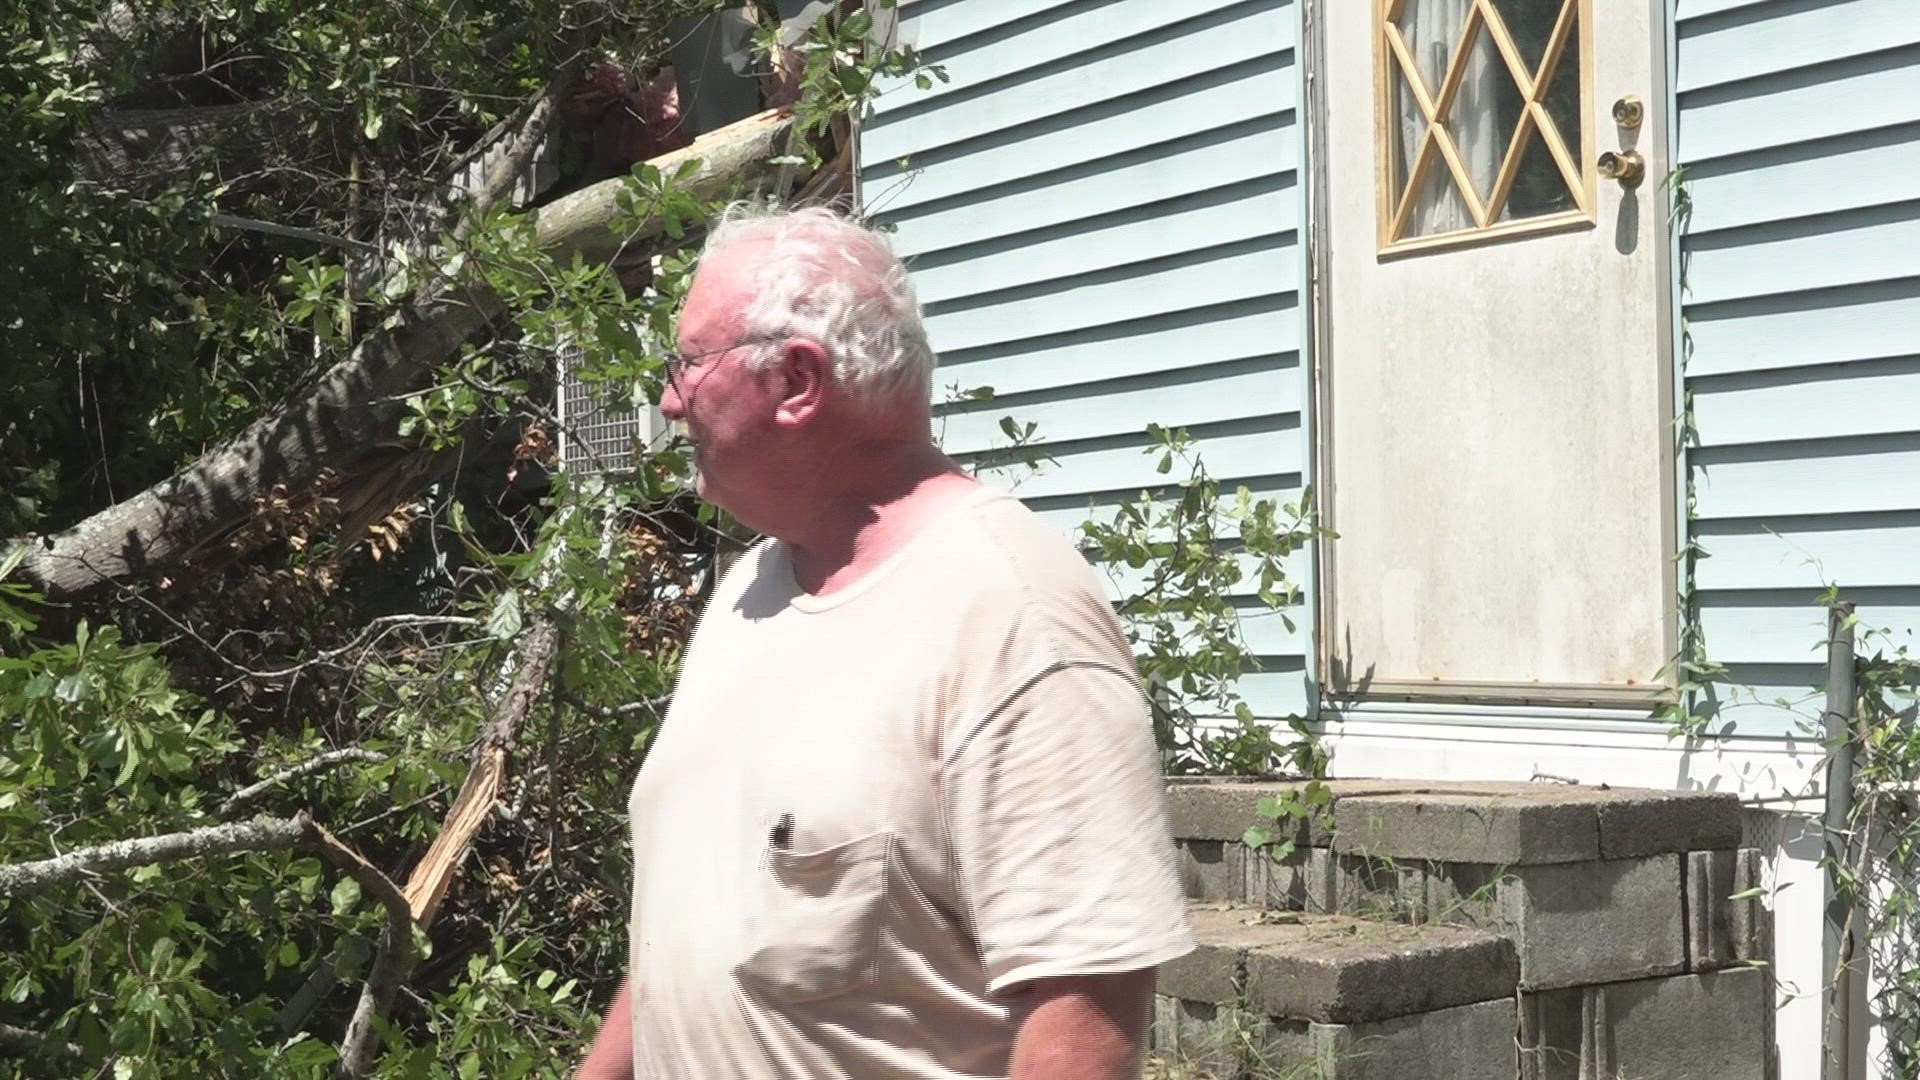 The gusty winds sent a tree crashing down destroying the home of Robert Schifflett and his wife.